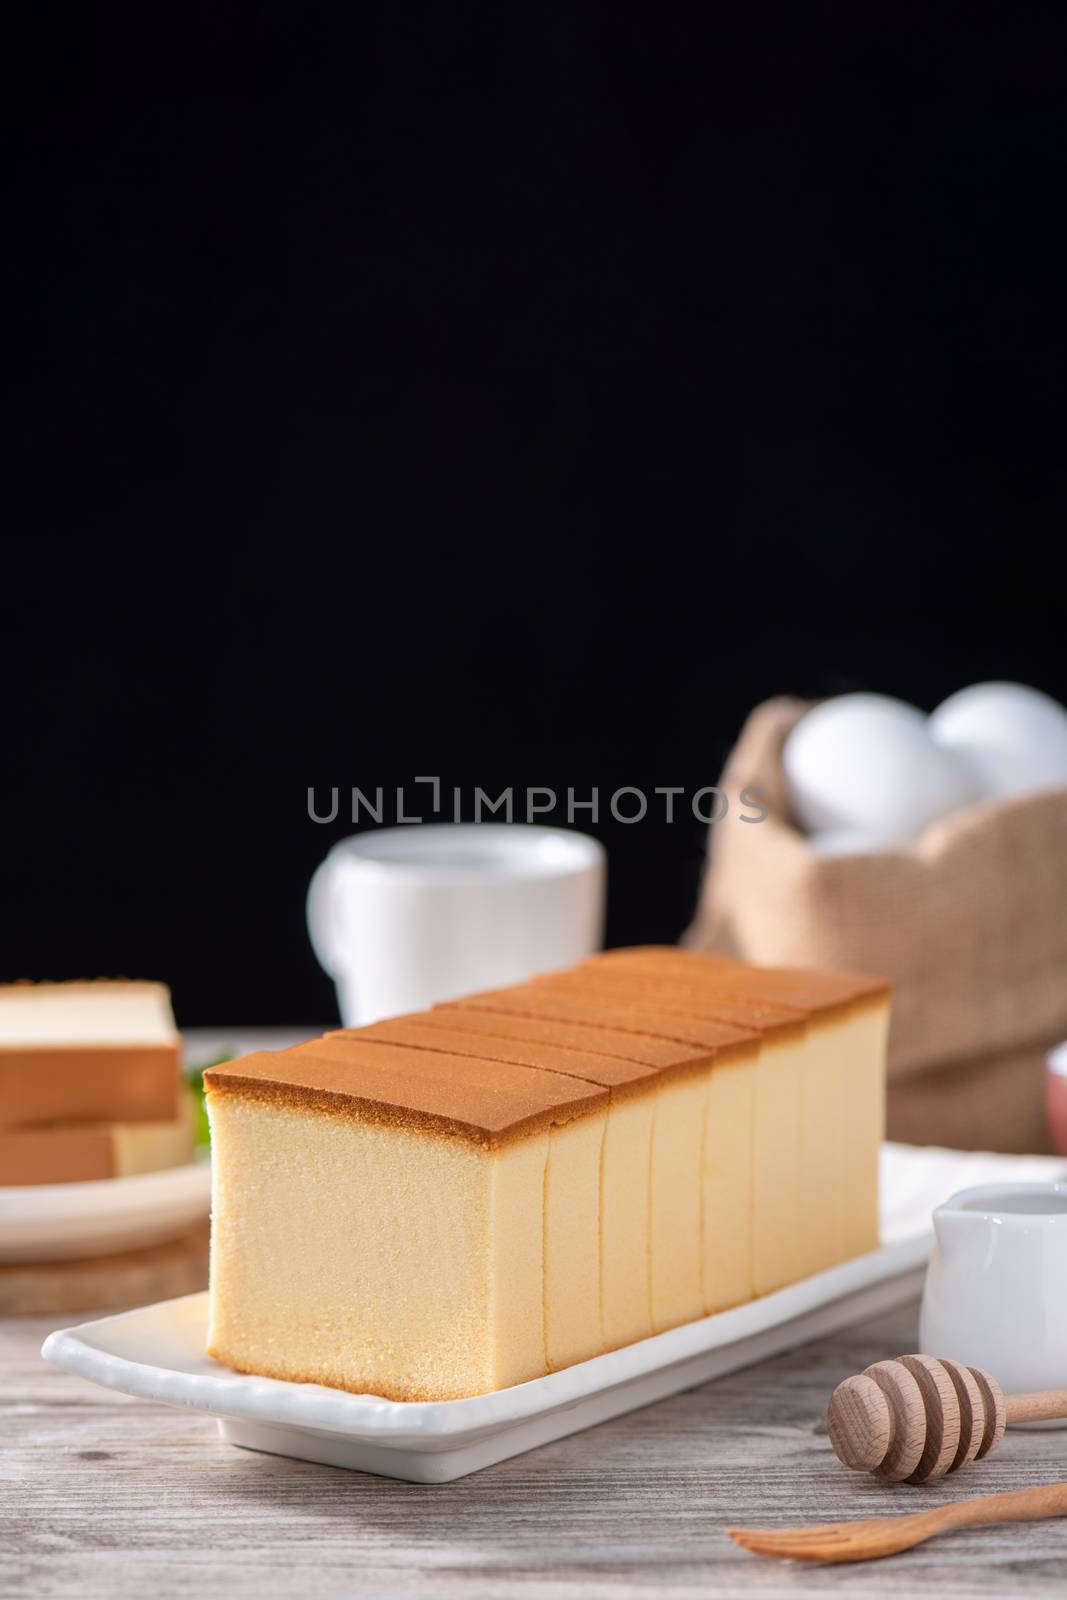 Castella (kasutera) - Delicious Japanese sliced sponge cake food on white plate over rustic wooden table, close up, healthy eating, copy space design.